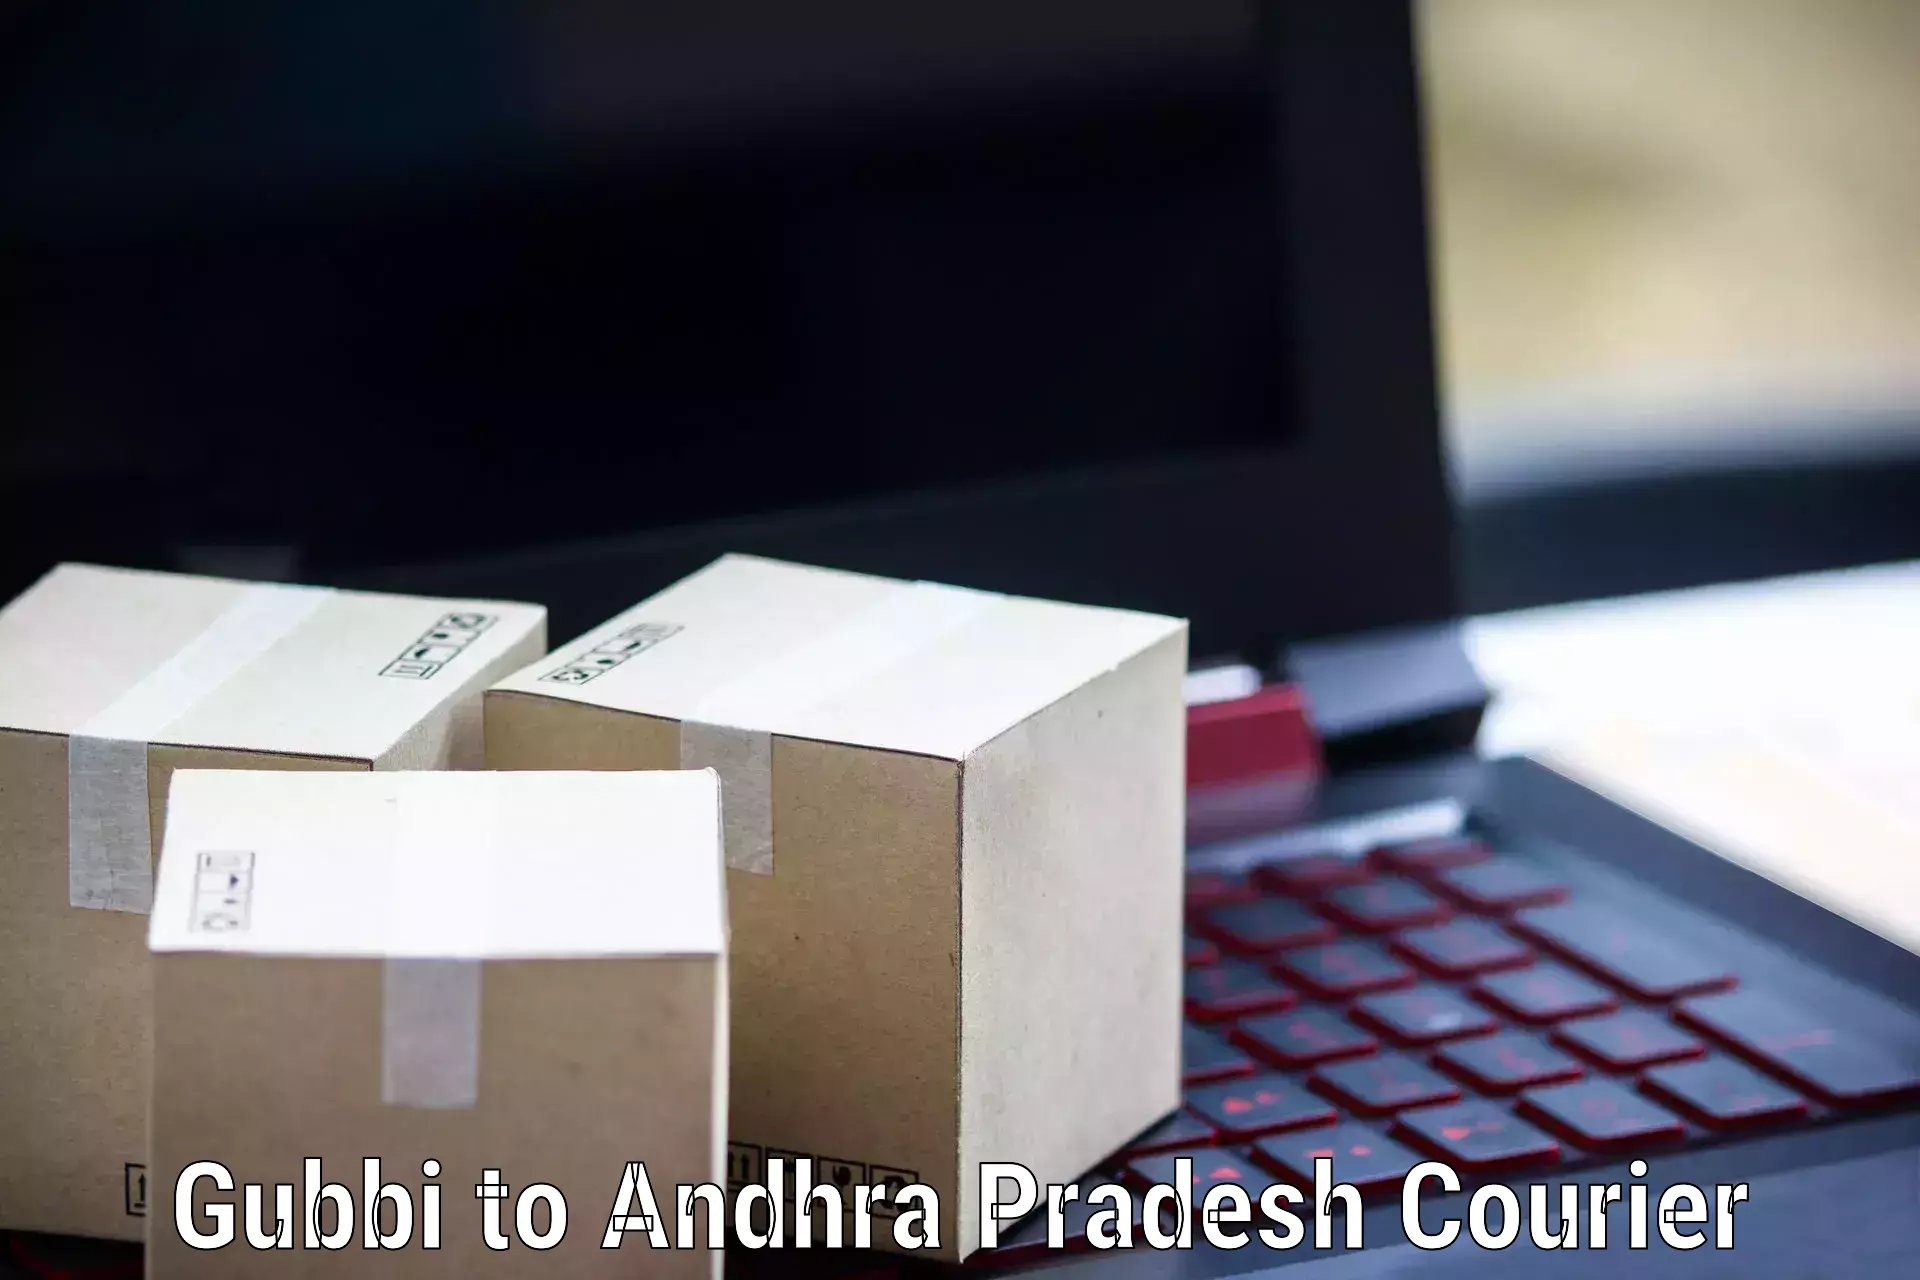 Round-the-clock parcel delivery in Gubbi to Adoni